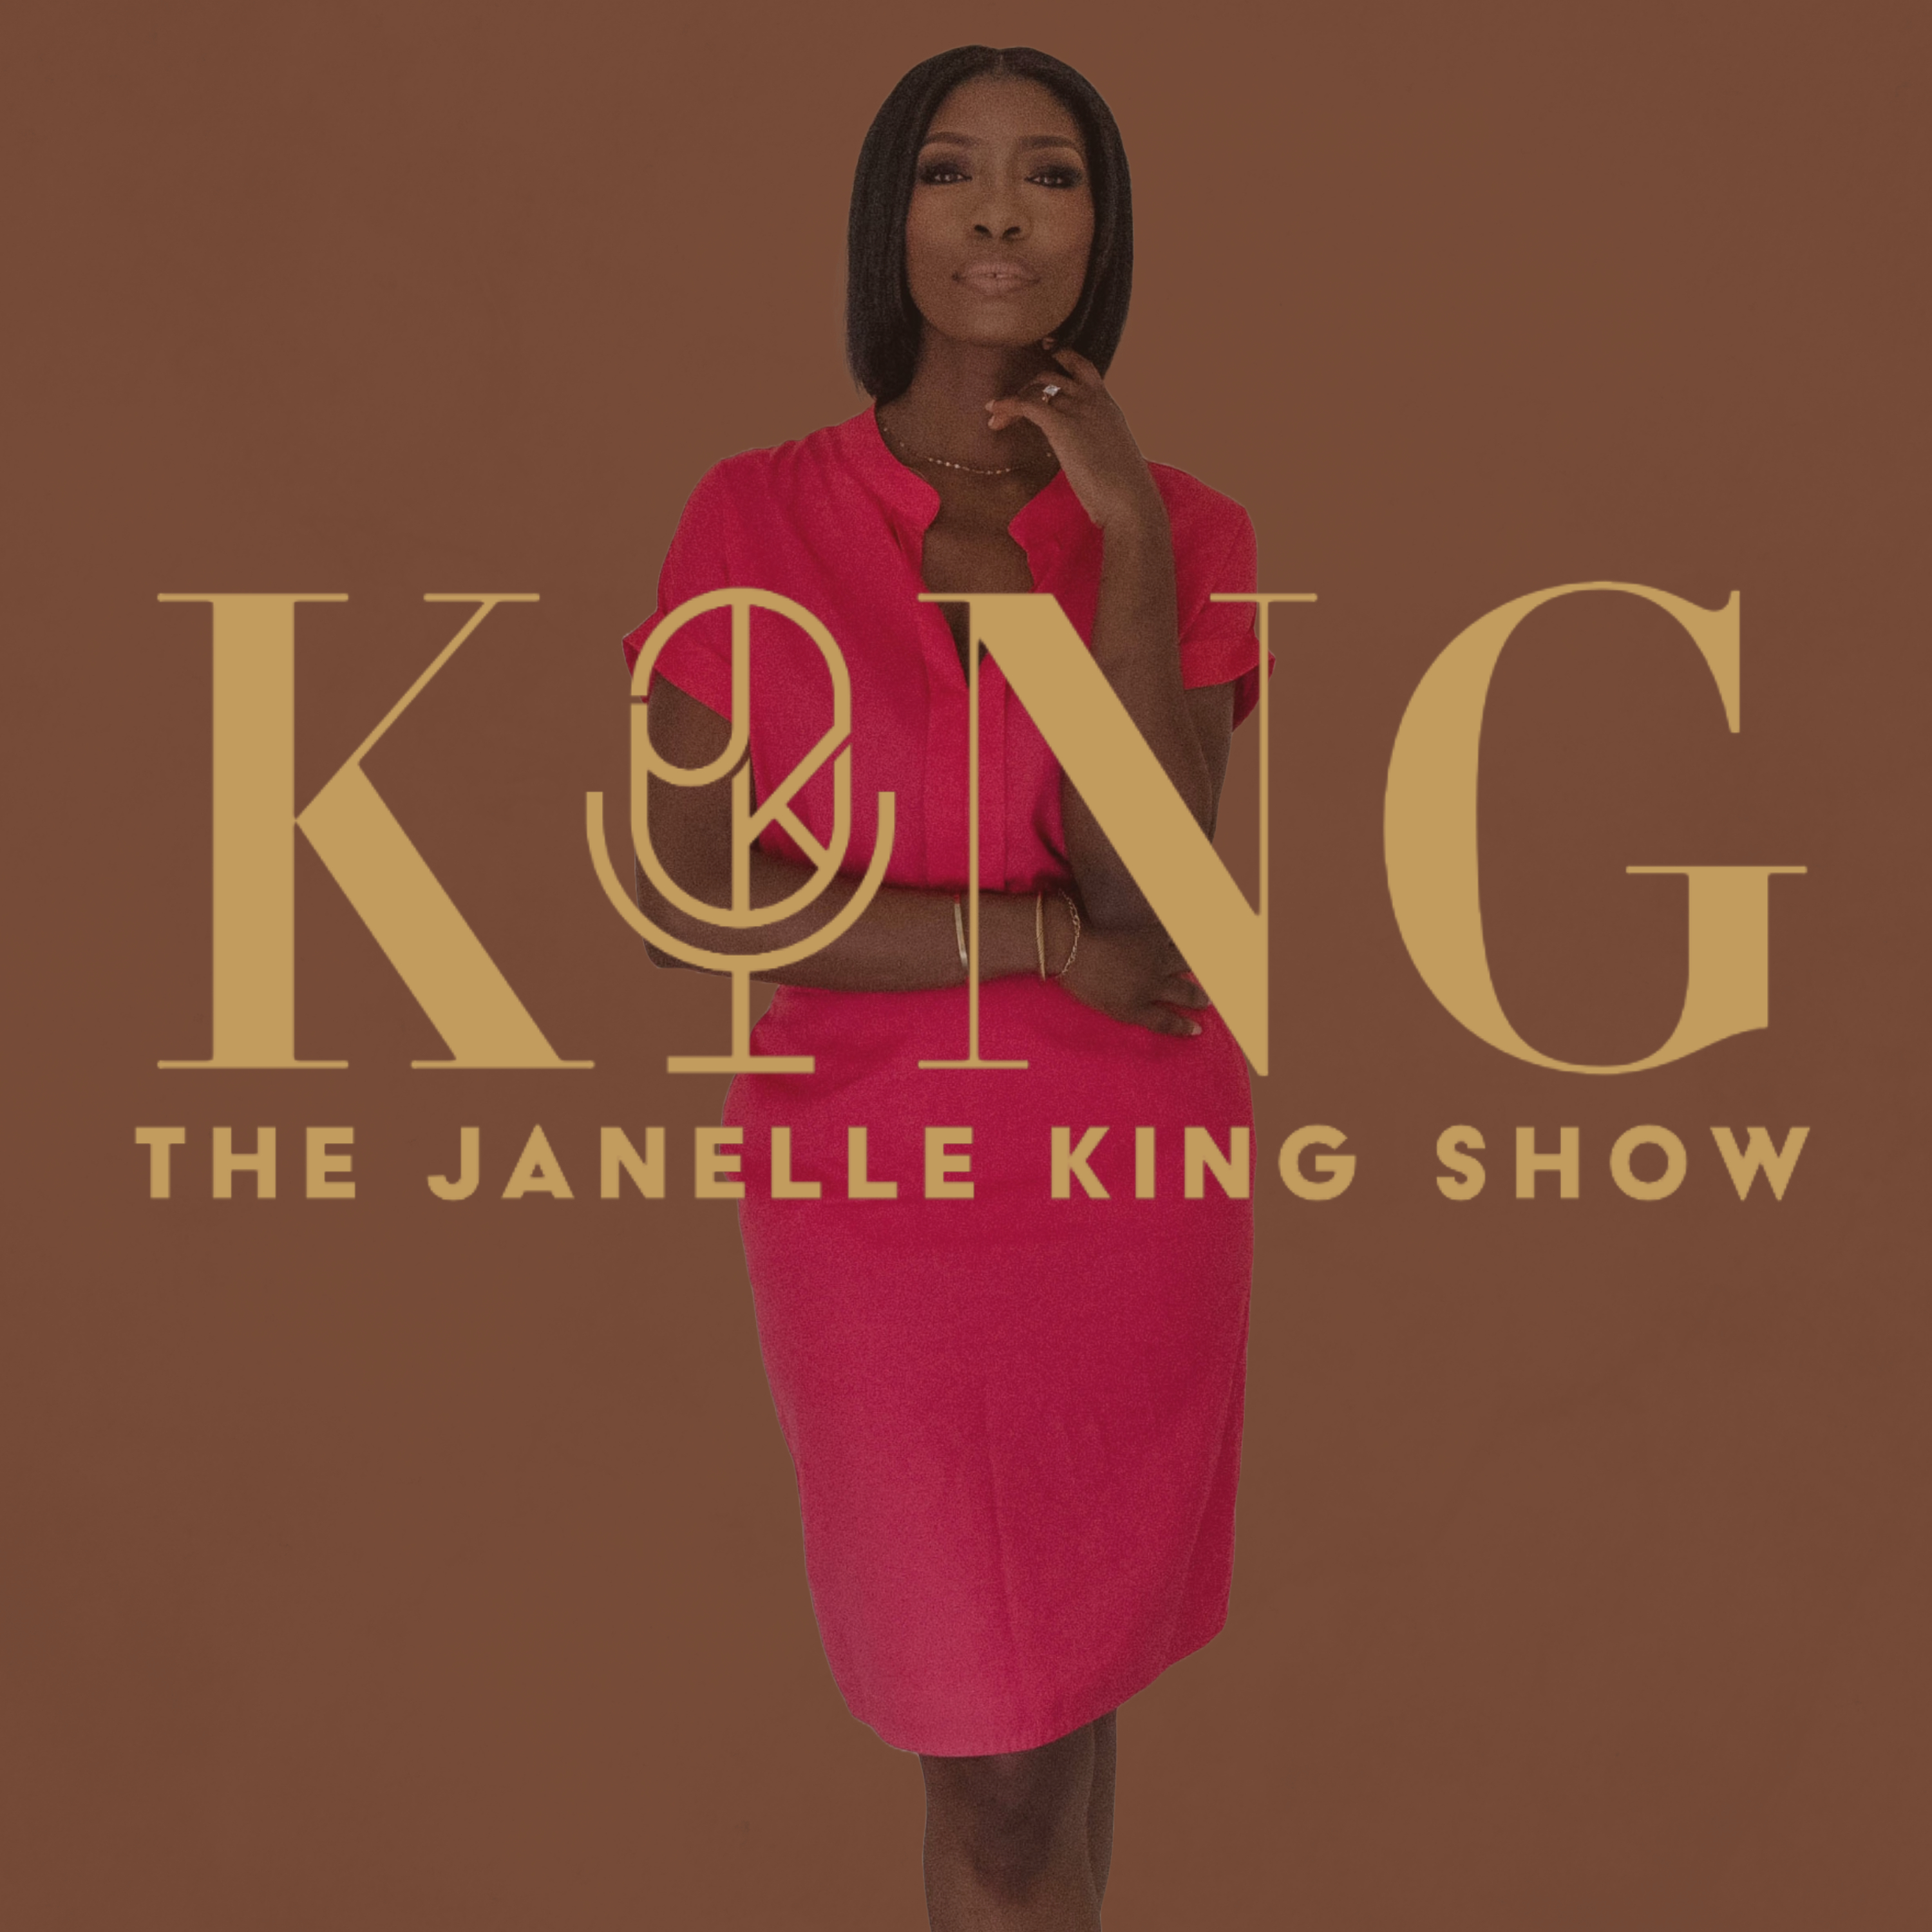 The Janelle King show - Laken Riley, Fani Willis, and Super Tuesday